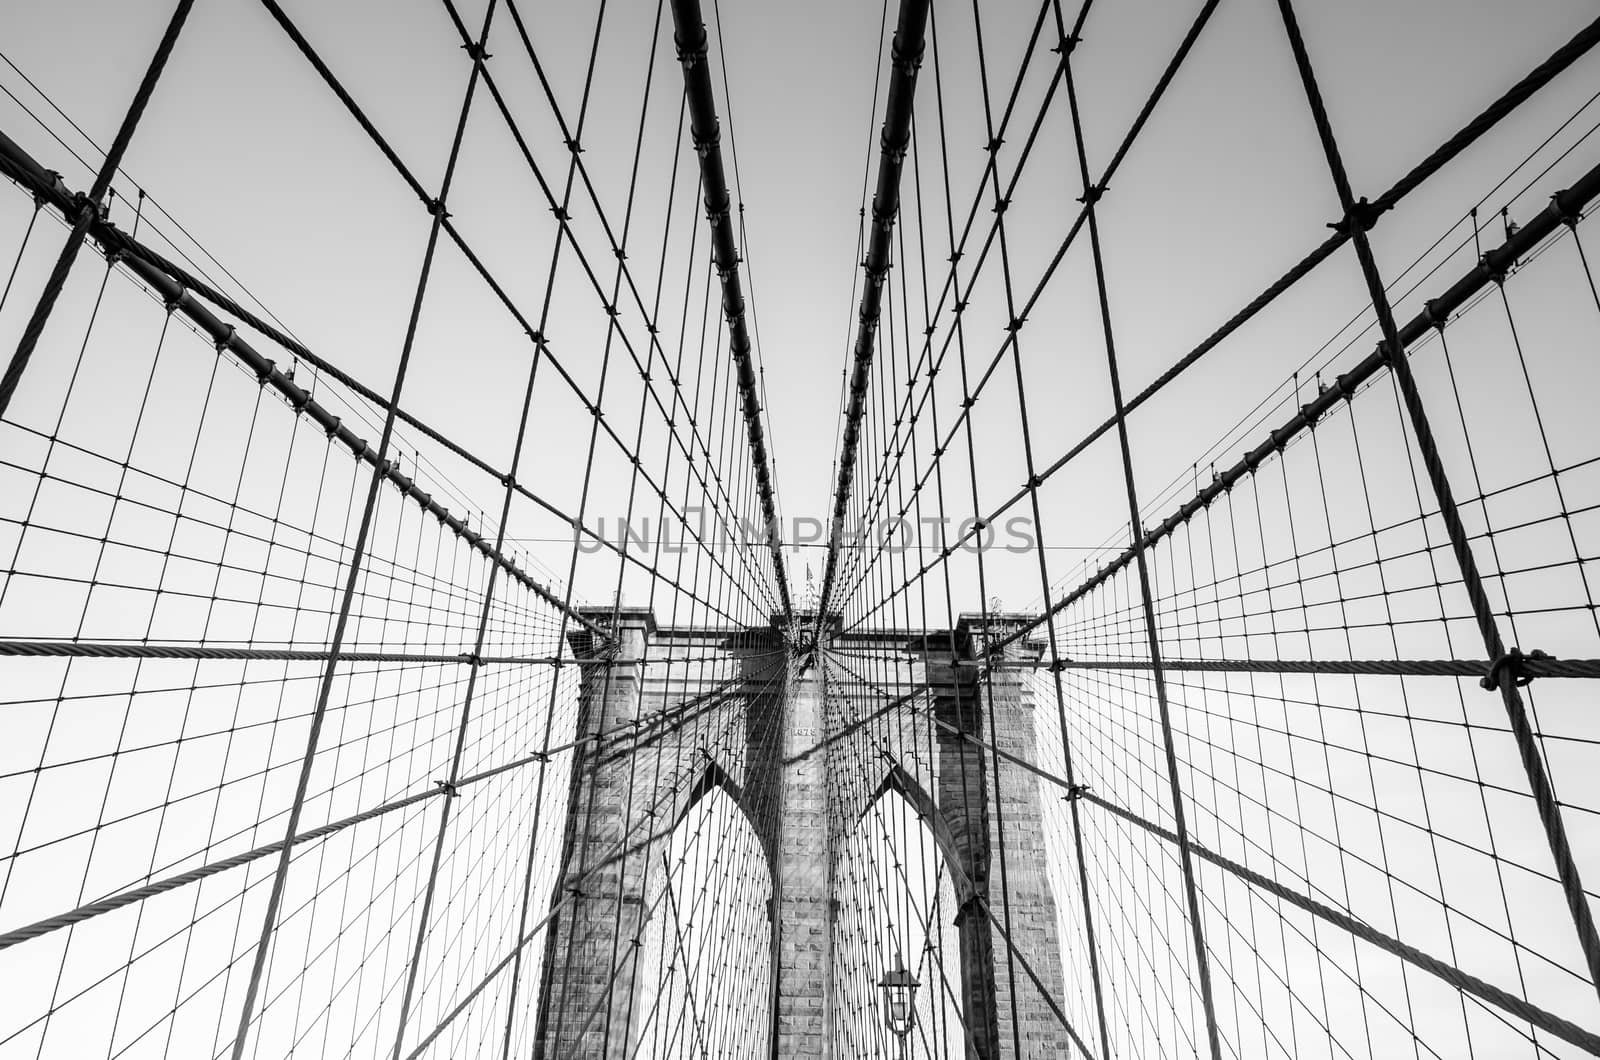 The web of cables of Brooklyn bridge in black and white, New York, USA by mauricallari